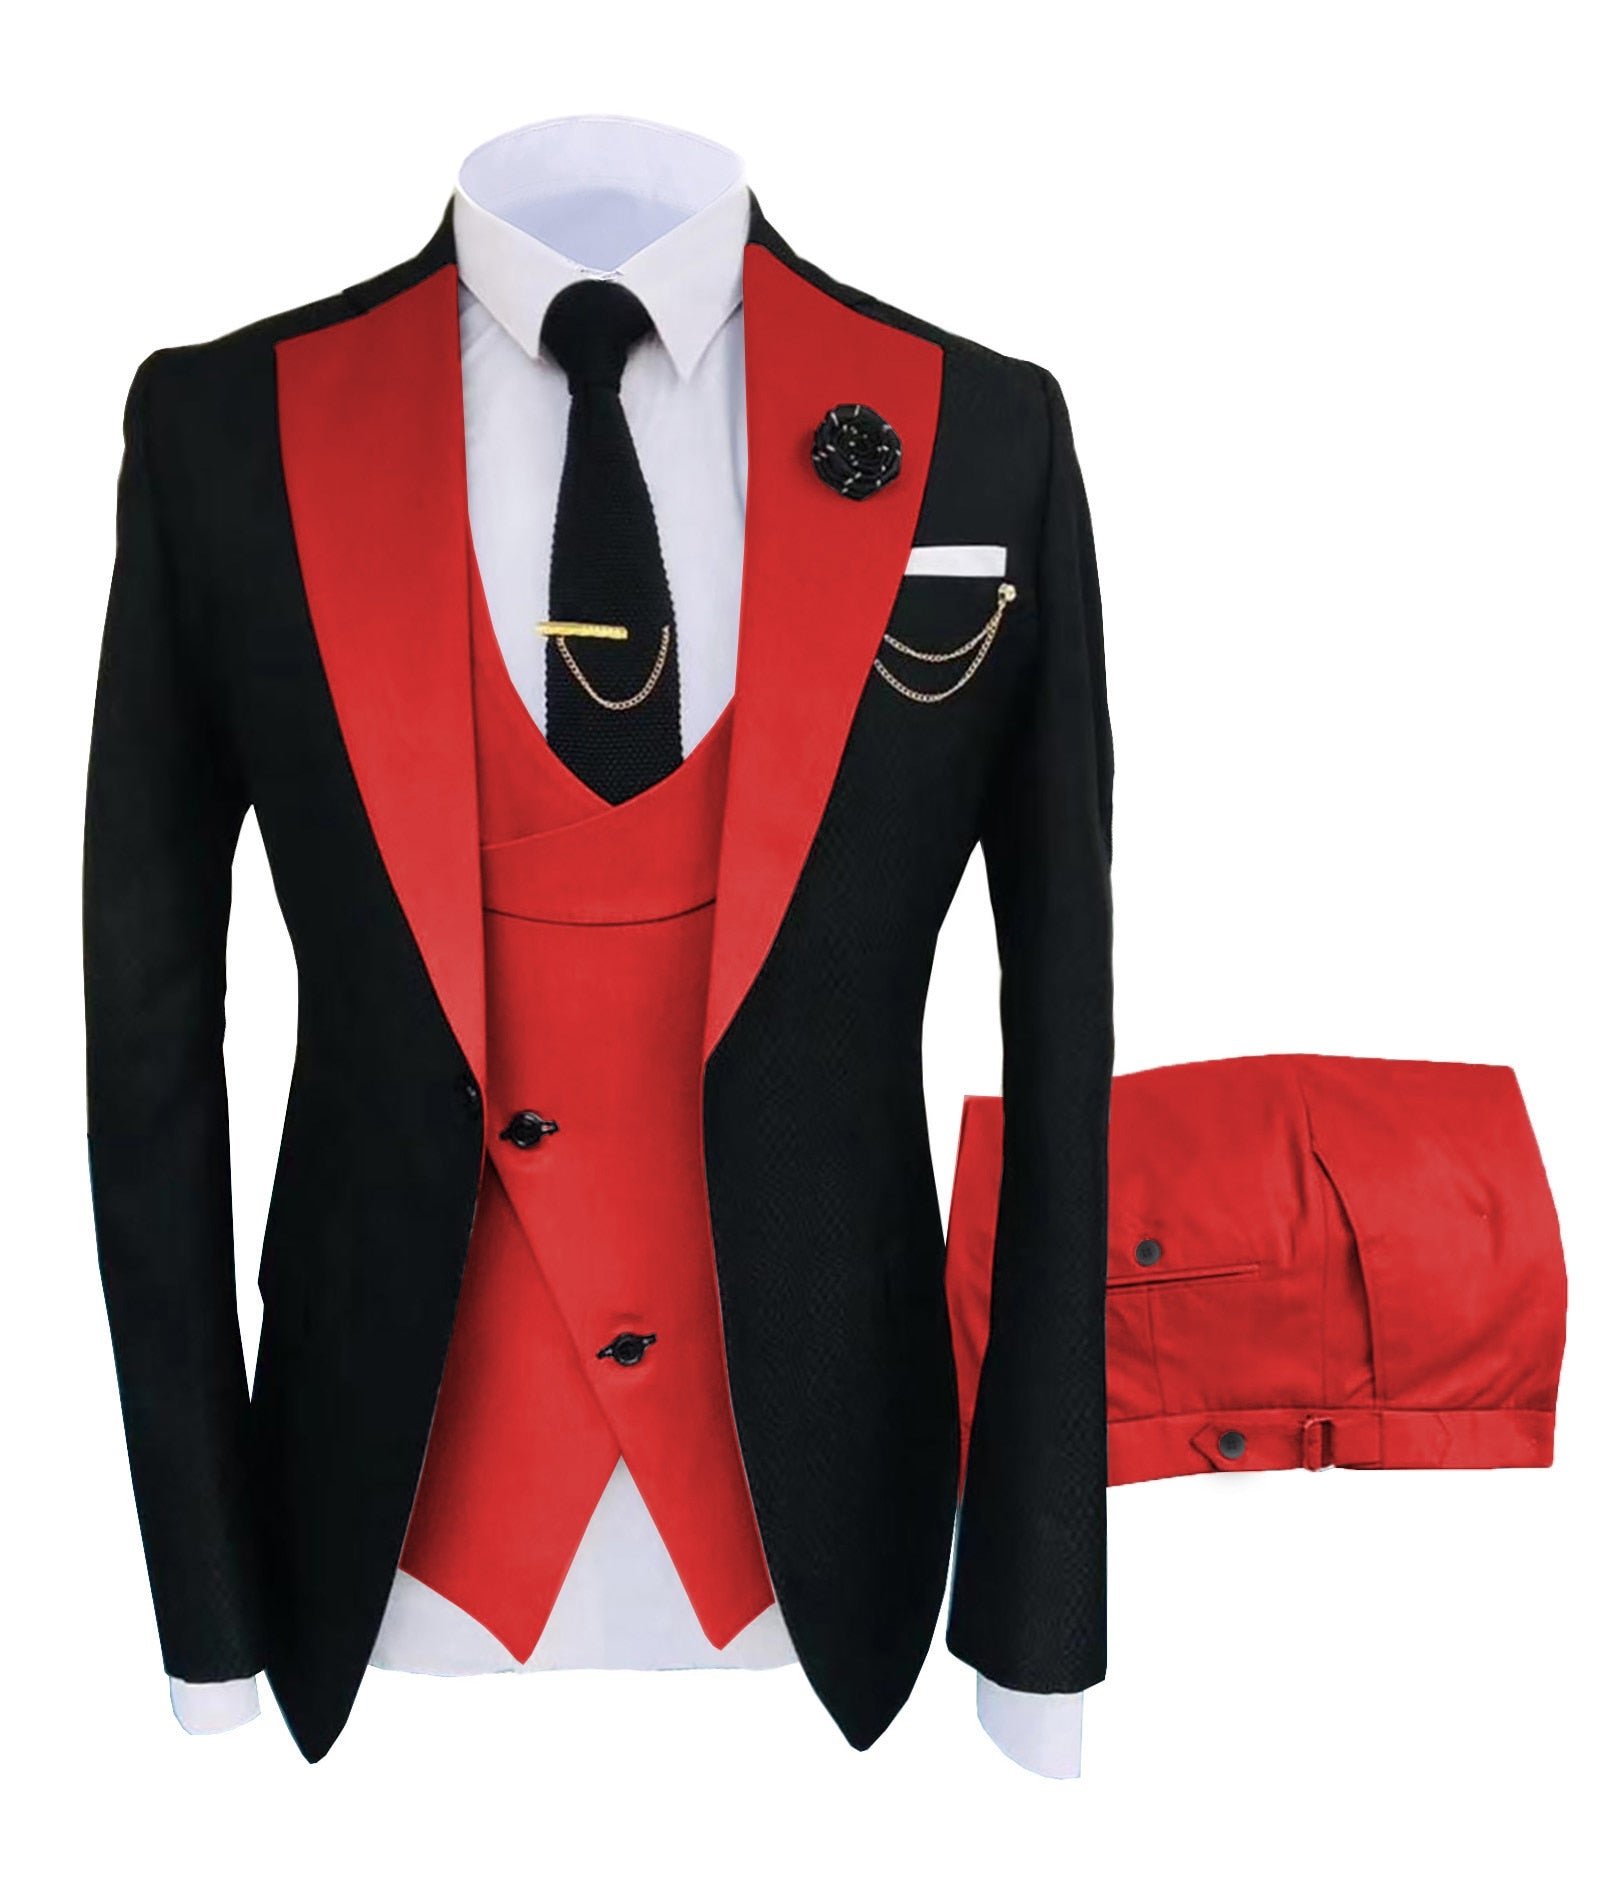 fashionable men red suits